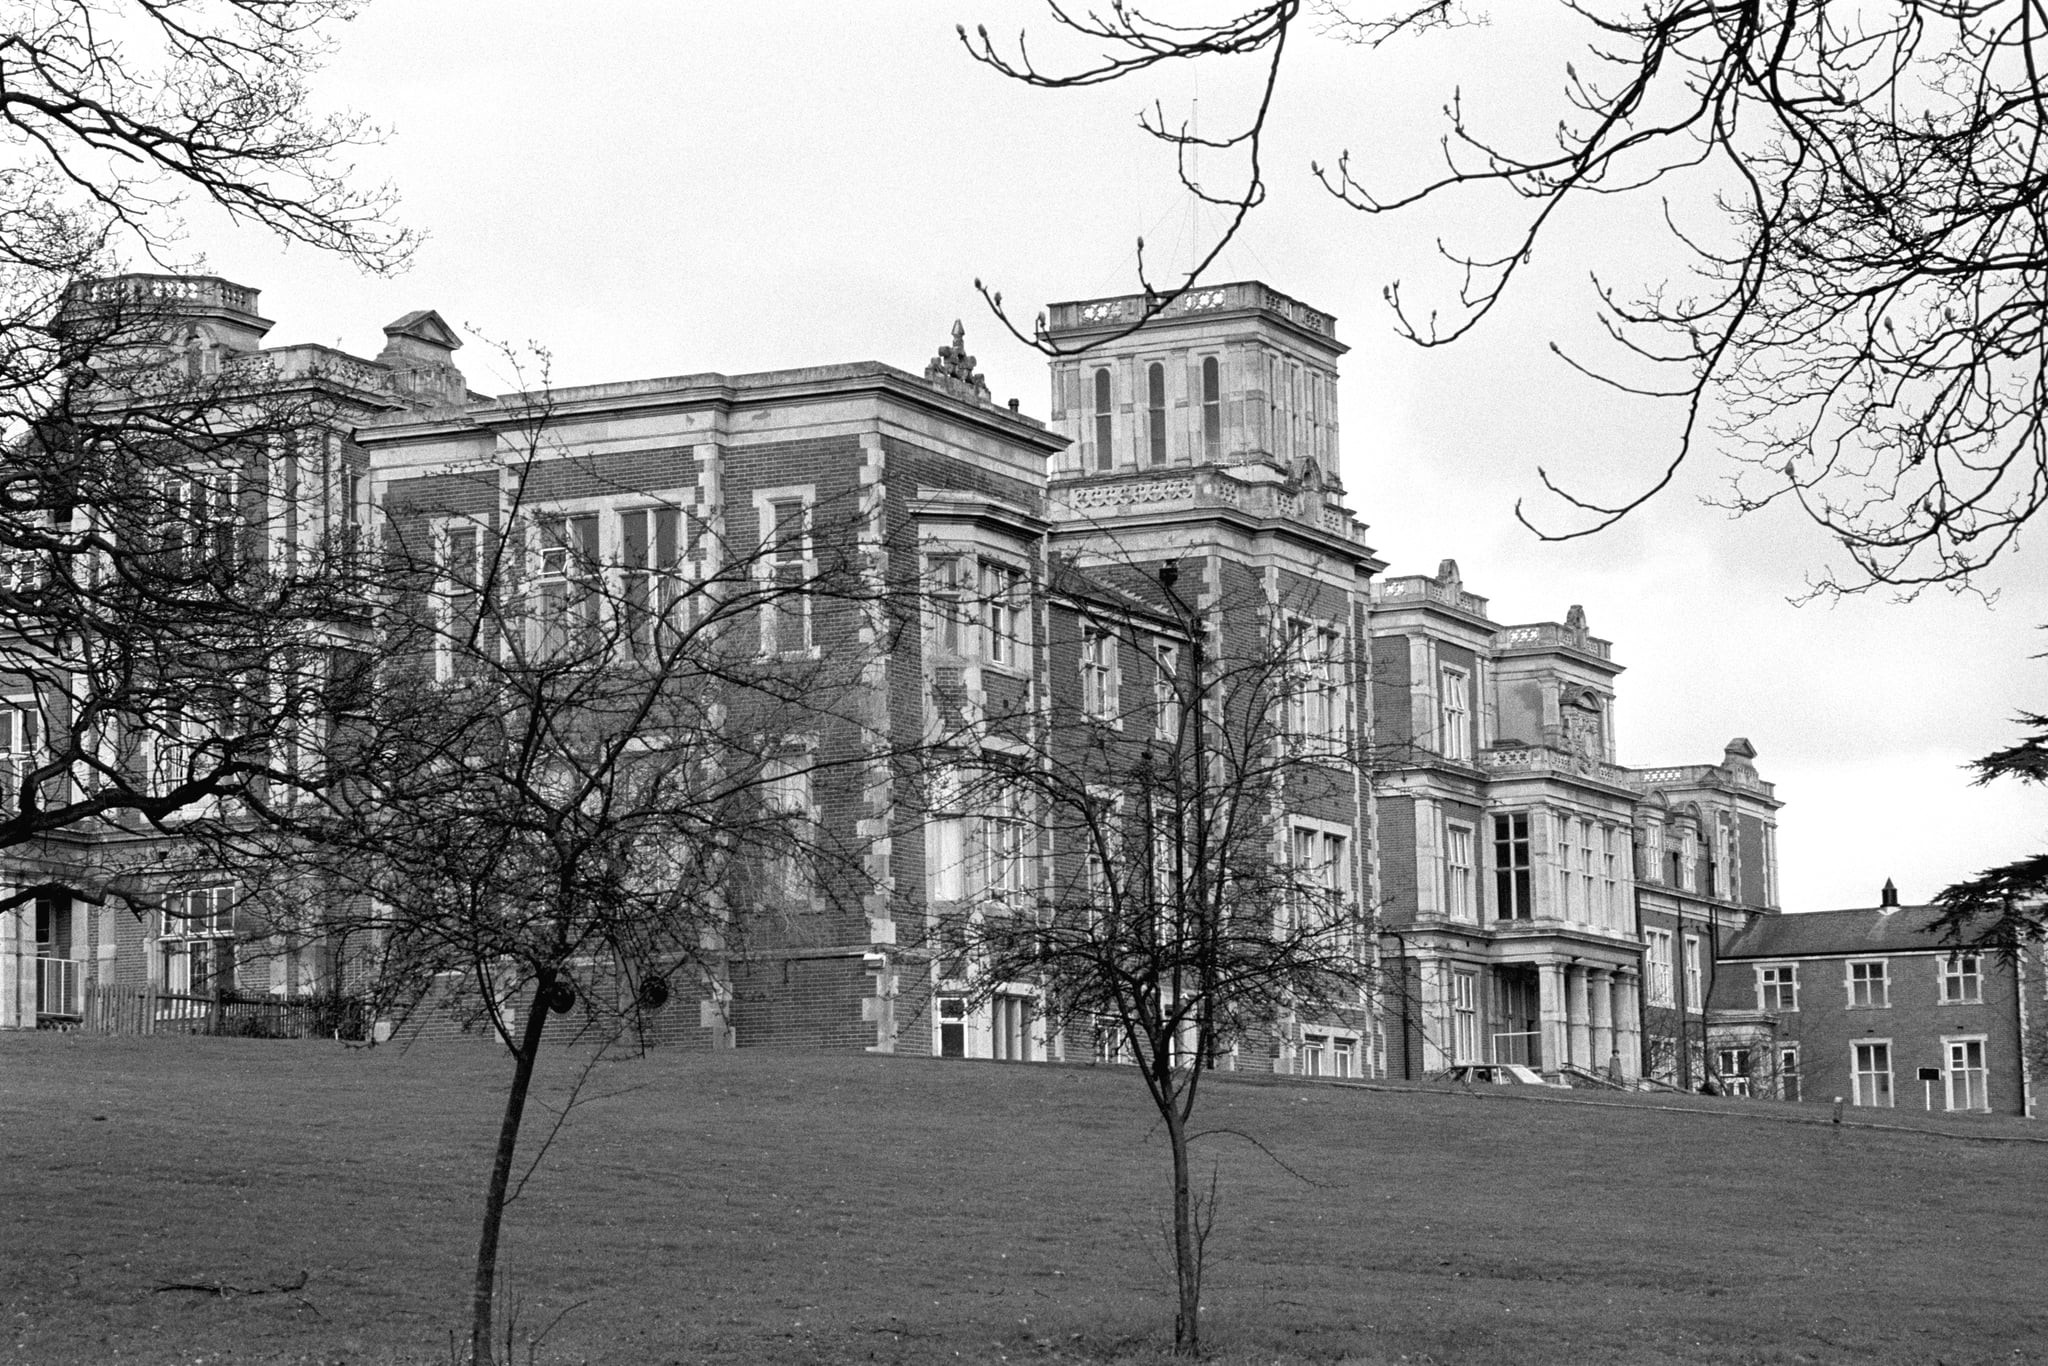 The Royal Earlswood Mental Hospital in Redhill, Surrey. It is reported that the Queen's Cousin, Katherine Bowes-Lyon, has been a resident since 1941 and where her sister Nerissa died in 1986.   (Photo by PA Images via Getty Images)